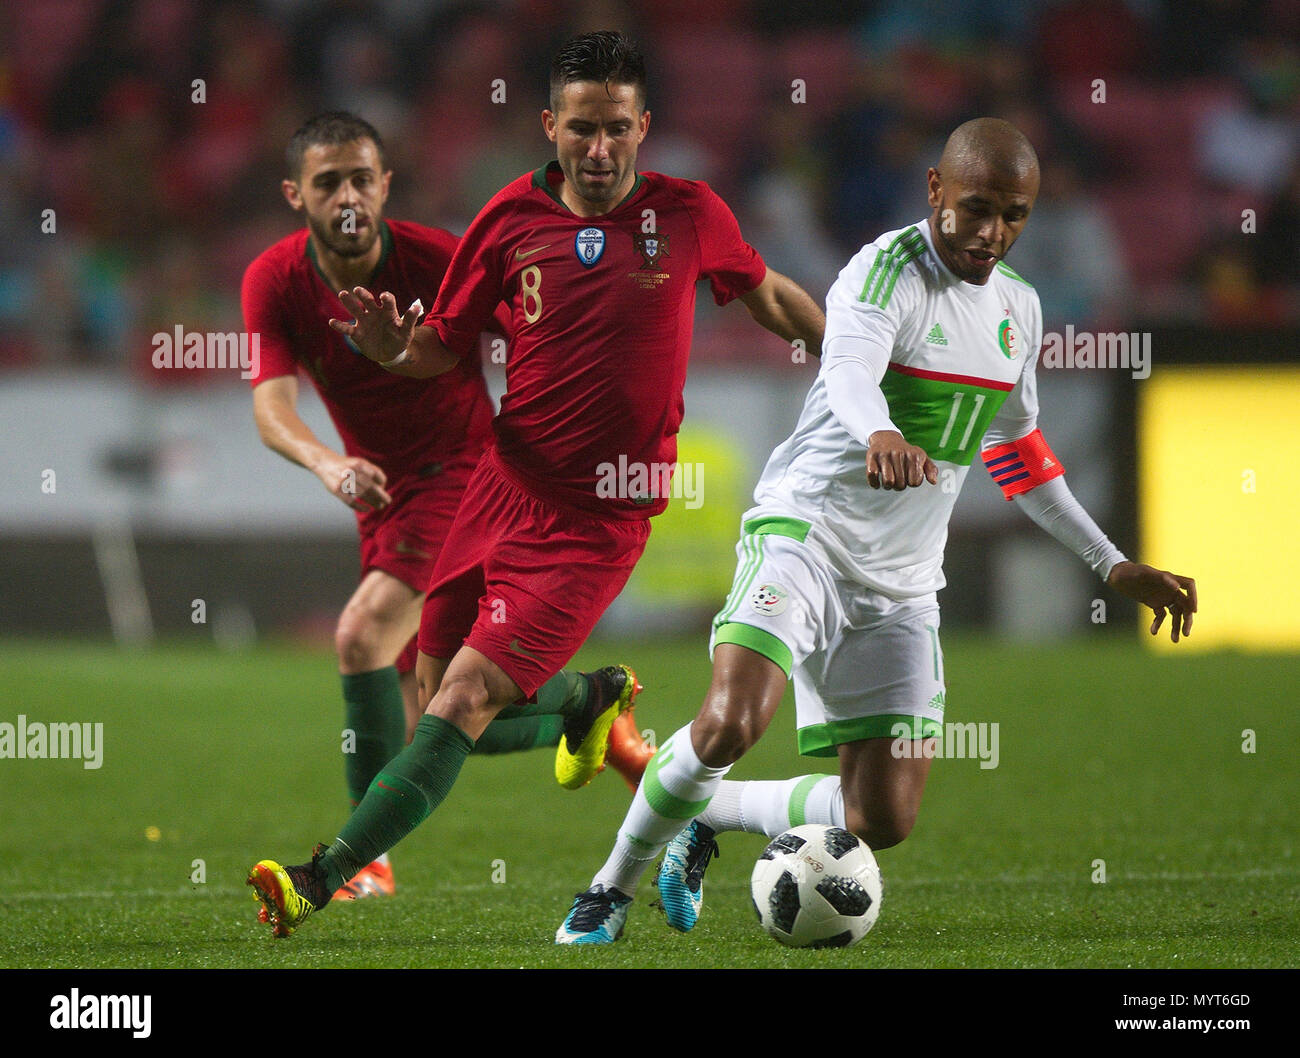 Lisbon, Portugal. 7th June, 2018. Joao Moutinho (C) of Portugal vies with Yacine Brahimi (R) of Algeria during the international friendly soccer match between Portugal and Algeria at Luz Stadium in Lisbon, Portugal, on June 7, 2018. Portugal won 3-0. Credit: Zhang Liyun/Xinhua/Alamy Live News Stock Photo